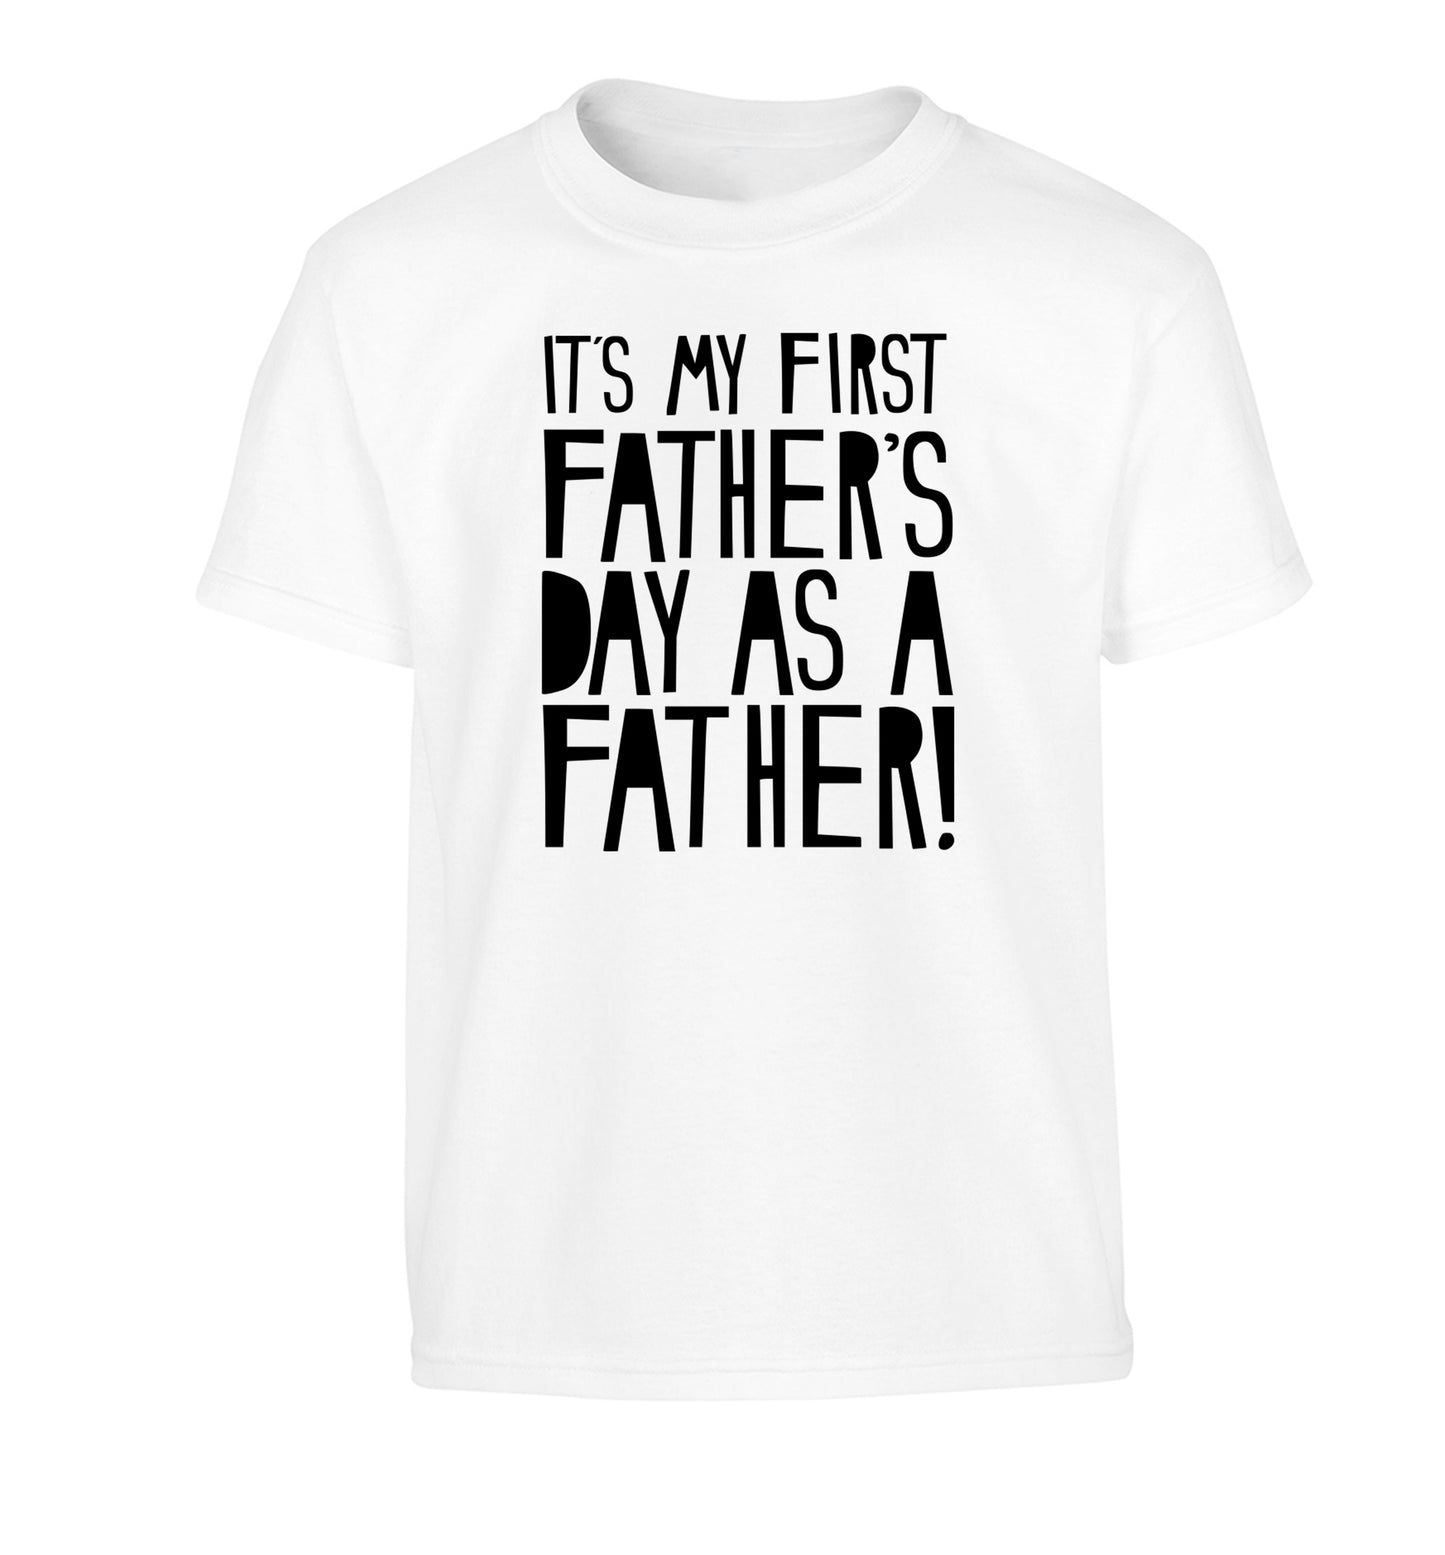 It's my first Father's Day as a father! Children's white Tshirt 12-13 Years